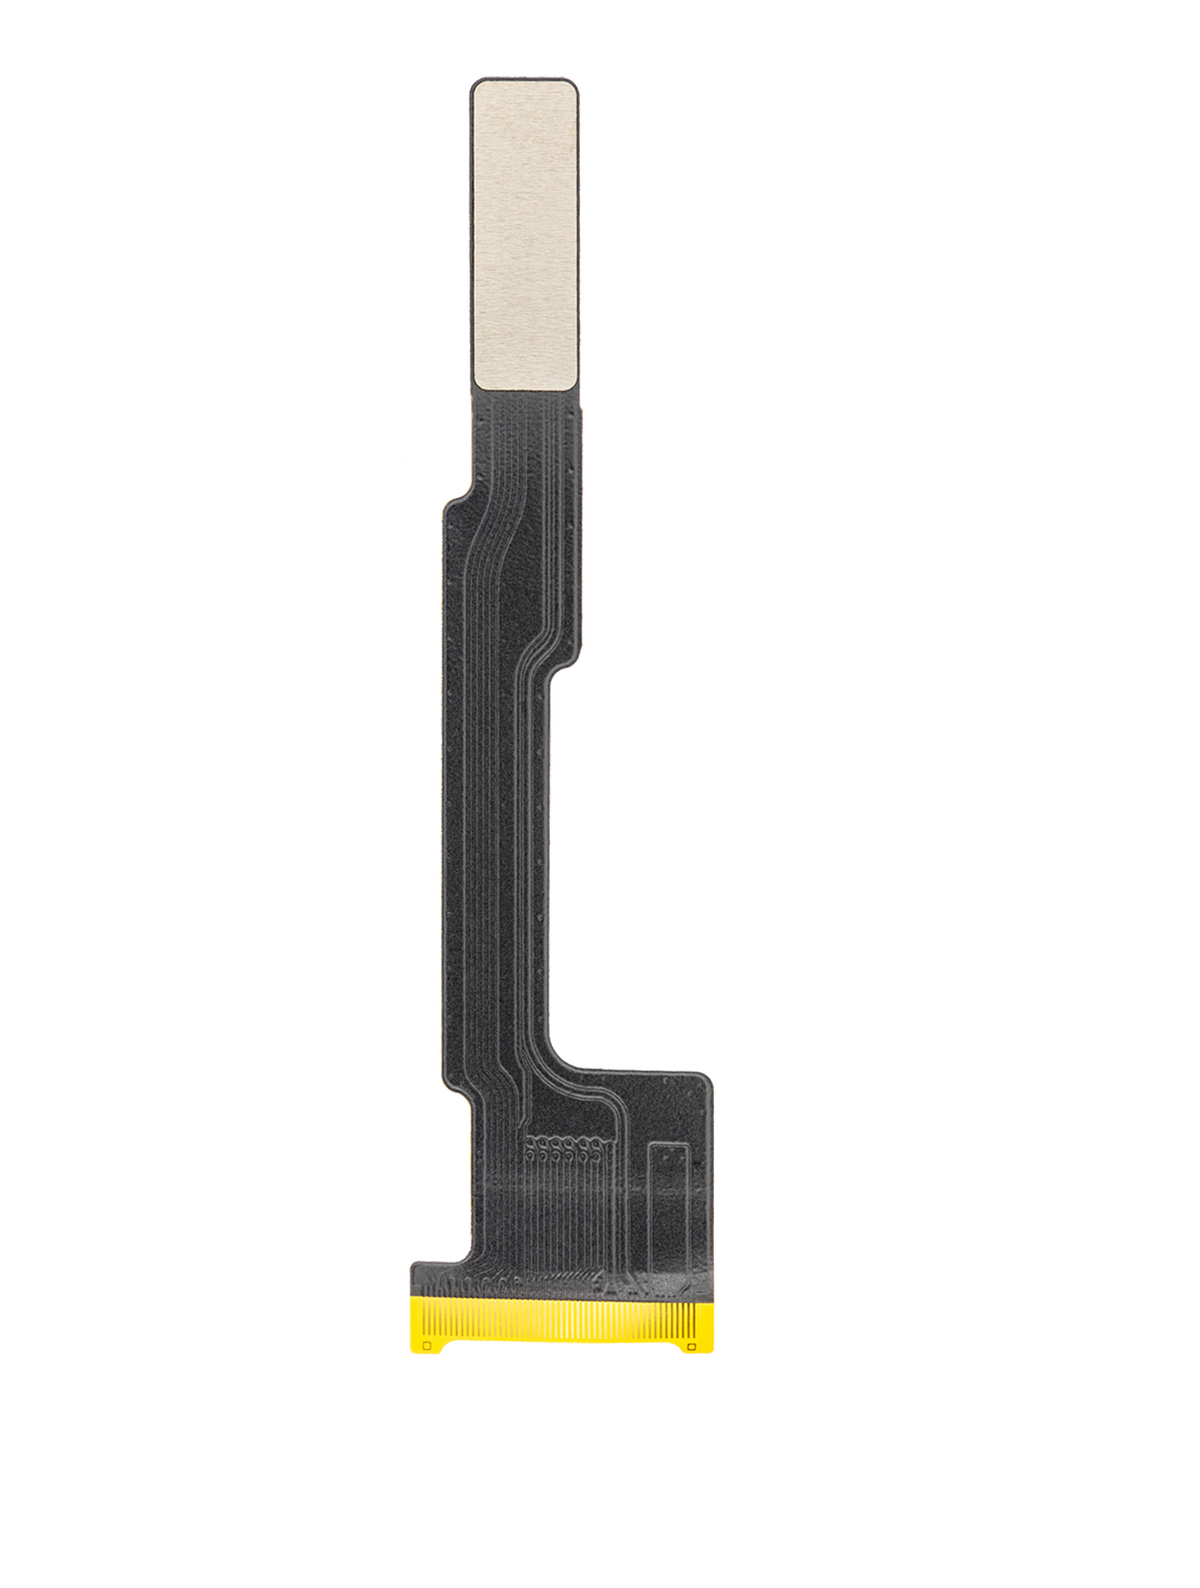 LCD FLEX CABLE COMPATIBLE WITH IPAD AIR 1  / IPAD 6 (2018)